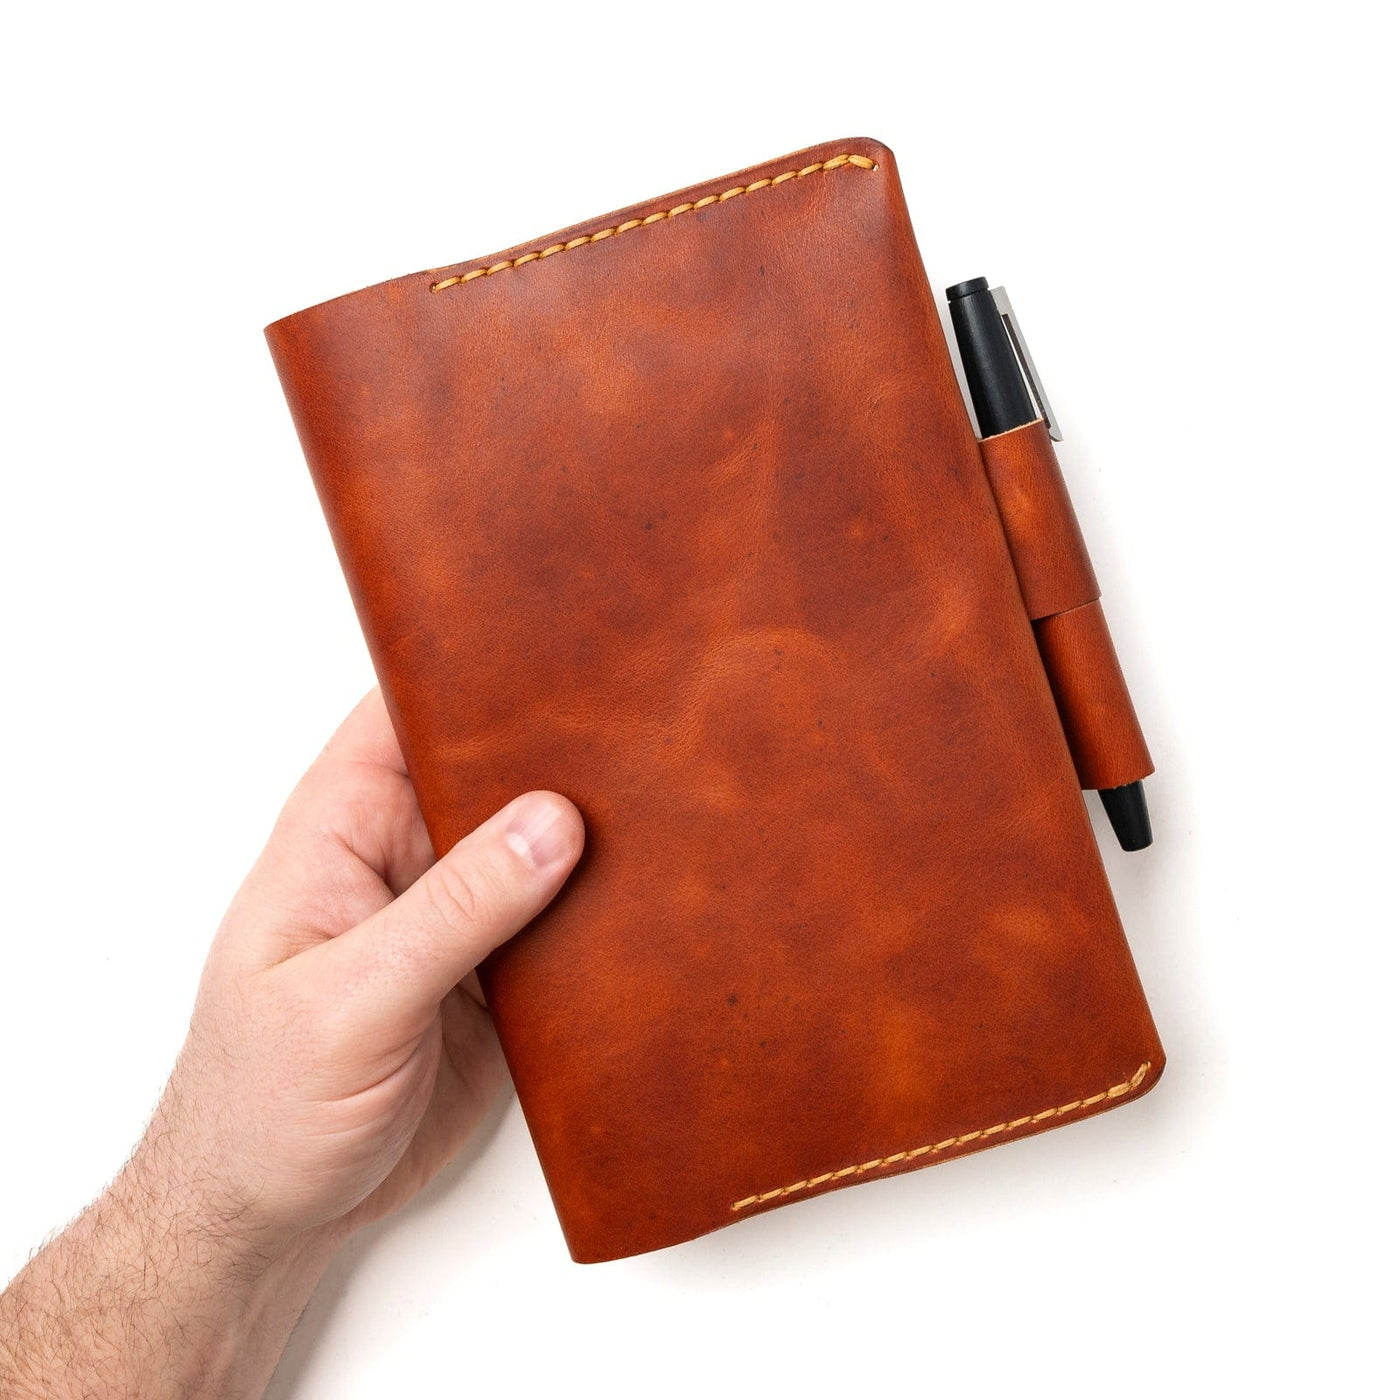 Leather Moleskine Large Notebook Cover - English Tan Popov Leather